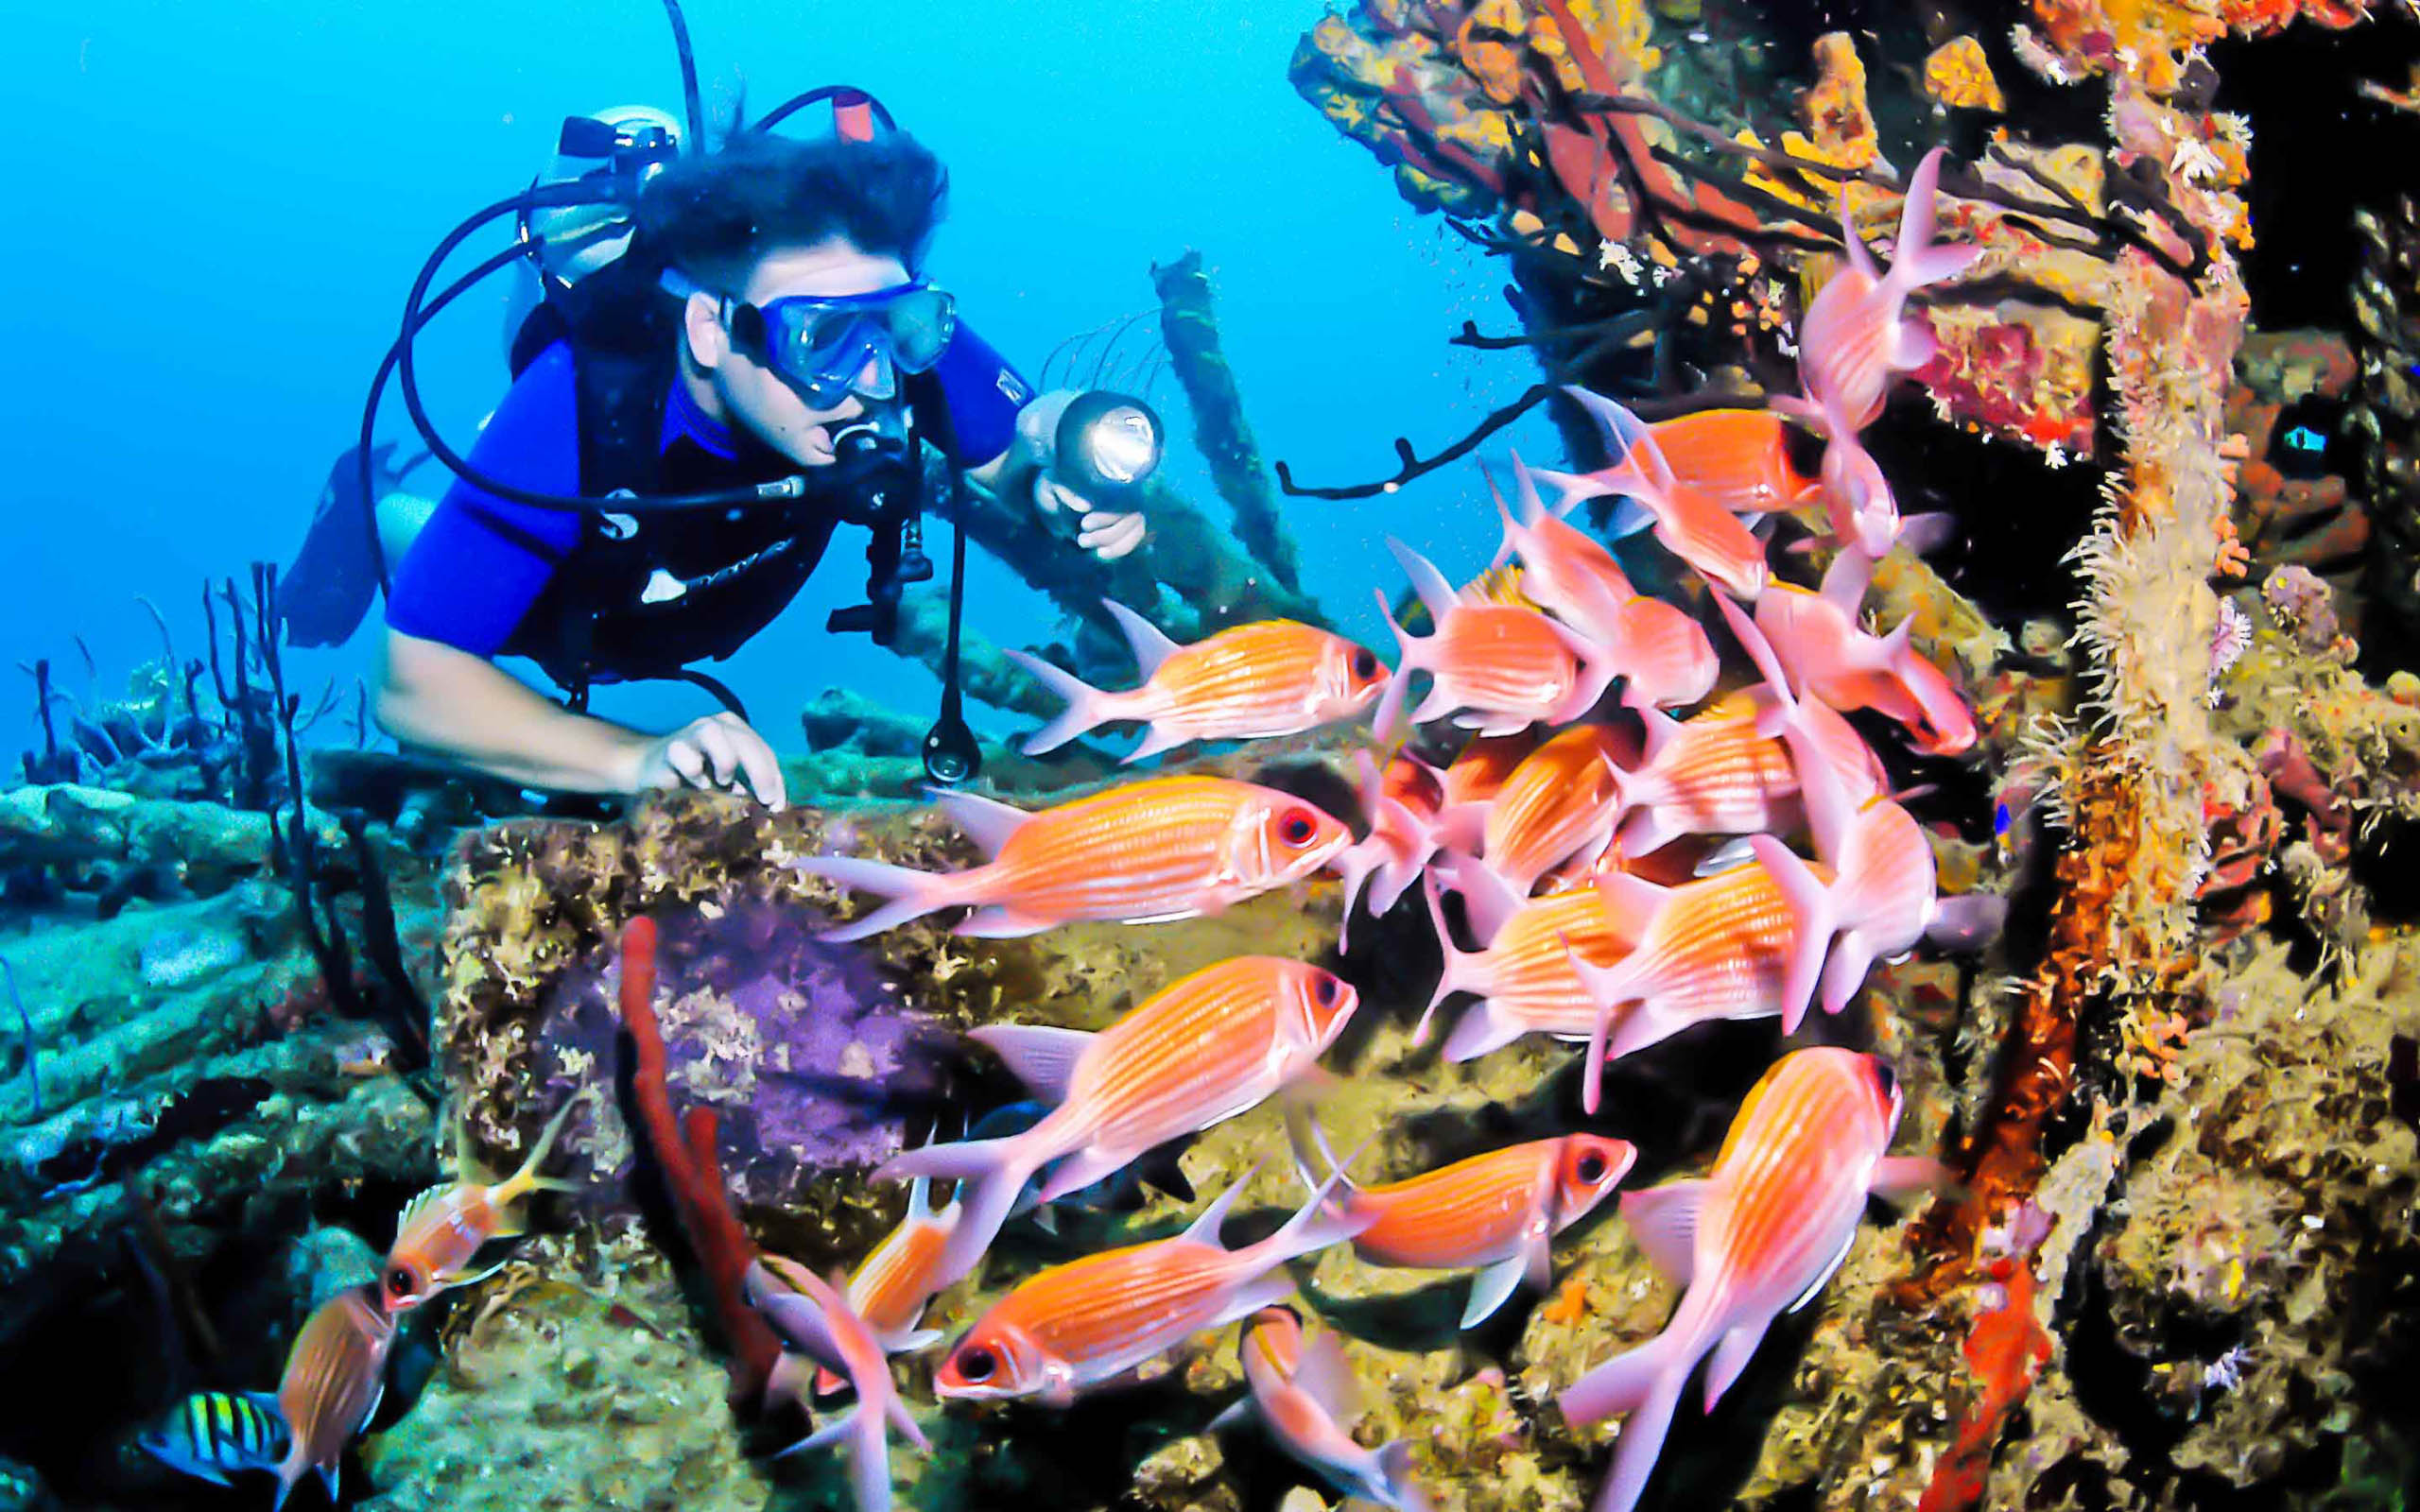 A scuba diver looking at a group of colorful fish.